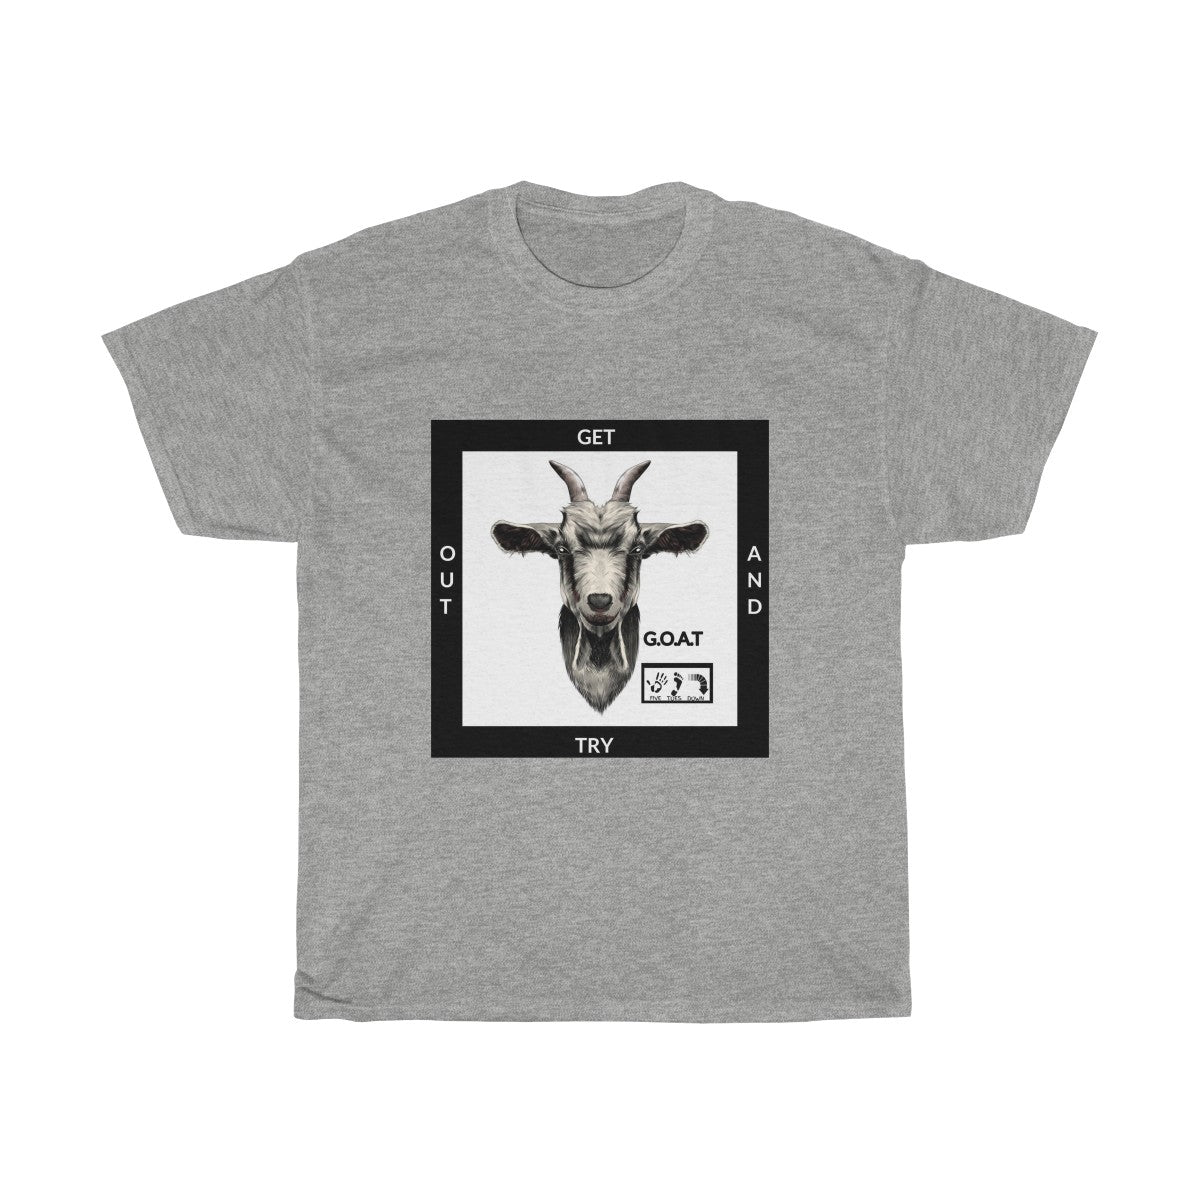 Five Toes Down G.O.A.T (Get out and try) Unisex Tee